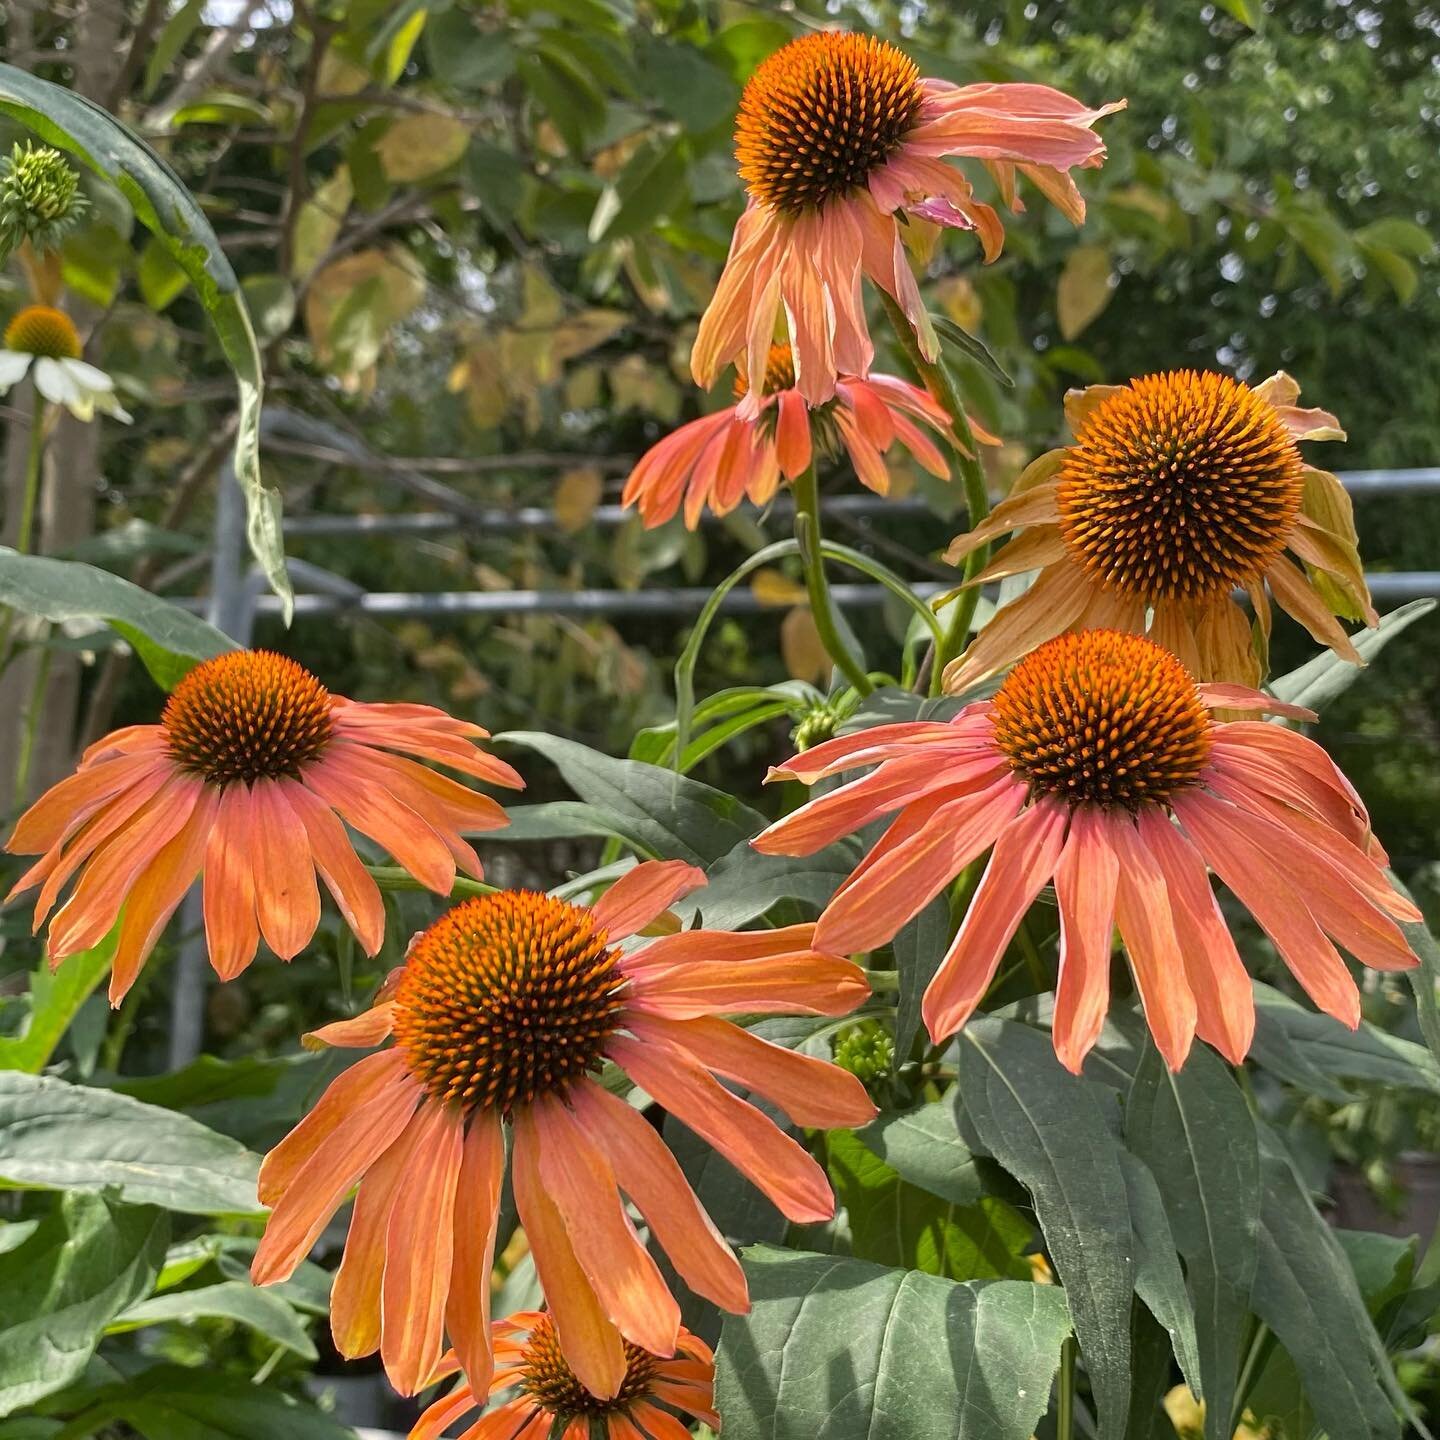 Did you know Cone Flower attract an abundance of butterfly? 🦋

☀️ Full sun loving perennial and long bloom lasting (July - September) These beauties will flourish your garden with the pop of colour it needs! 

1 gal $14.99
2 gal $23.99